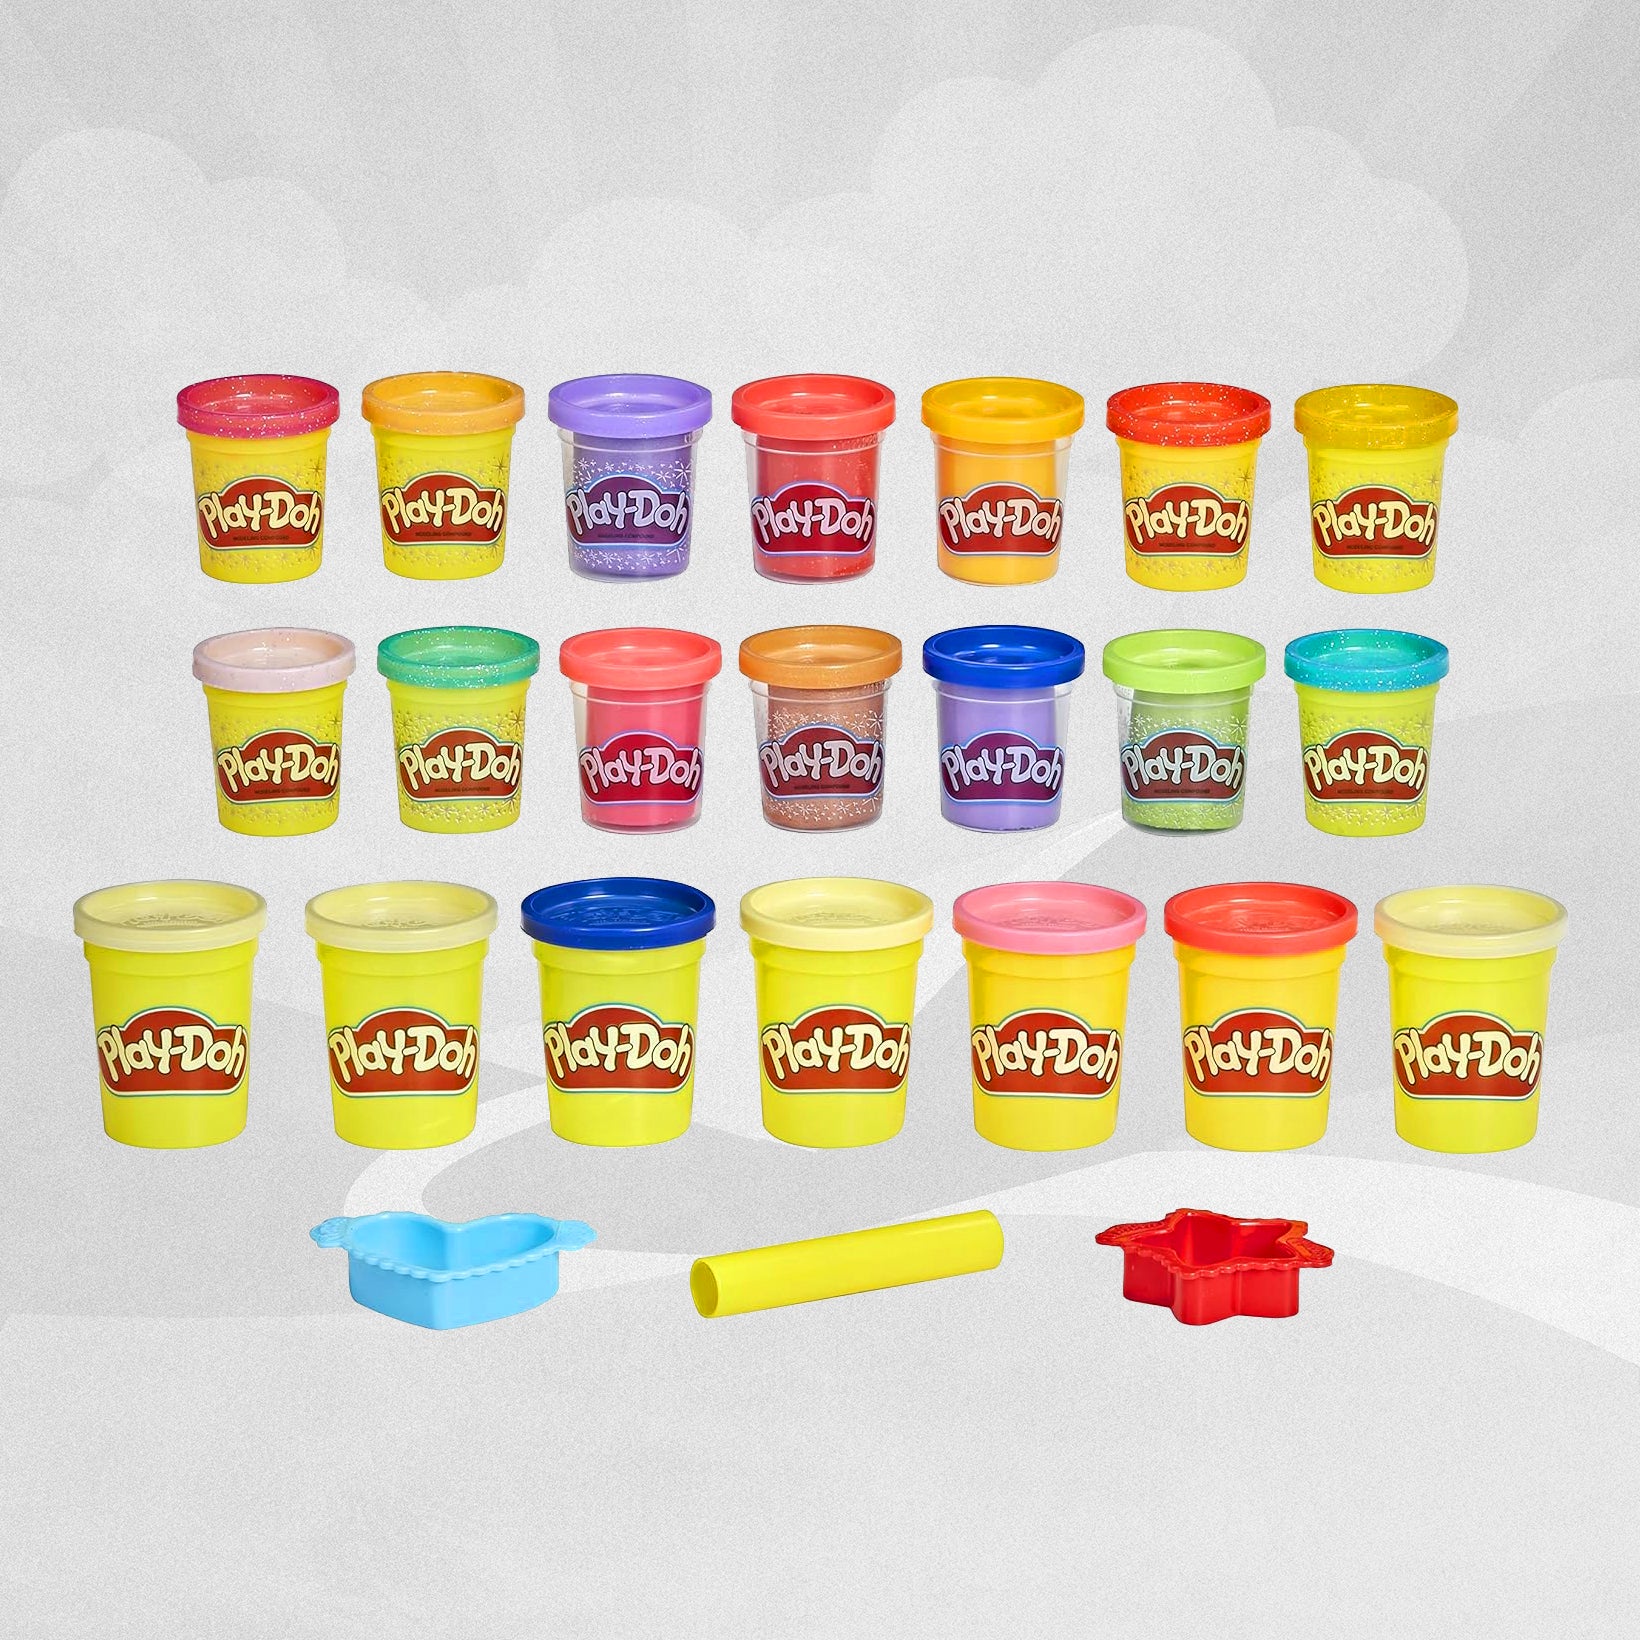 Play-Doh Bright 'n Happy Variety Pack with 21 Pots Including Sparkle and Metallic Shine